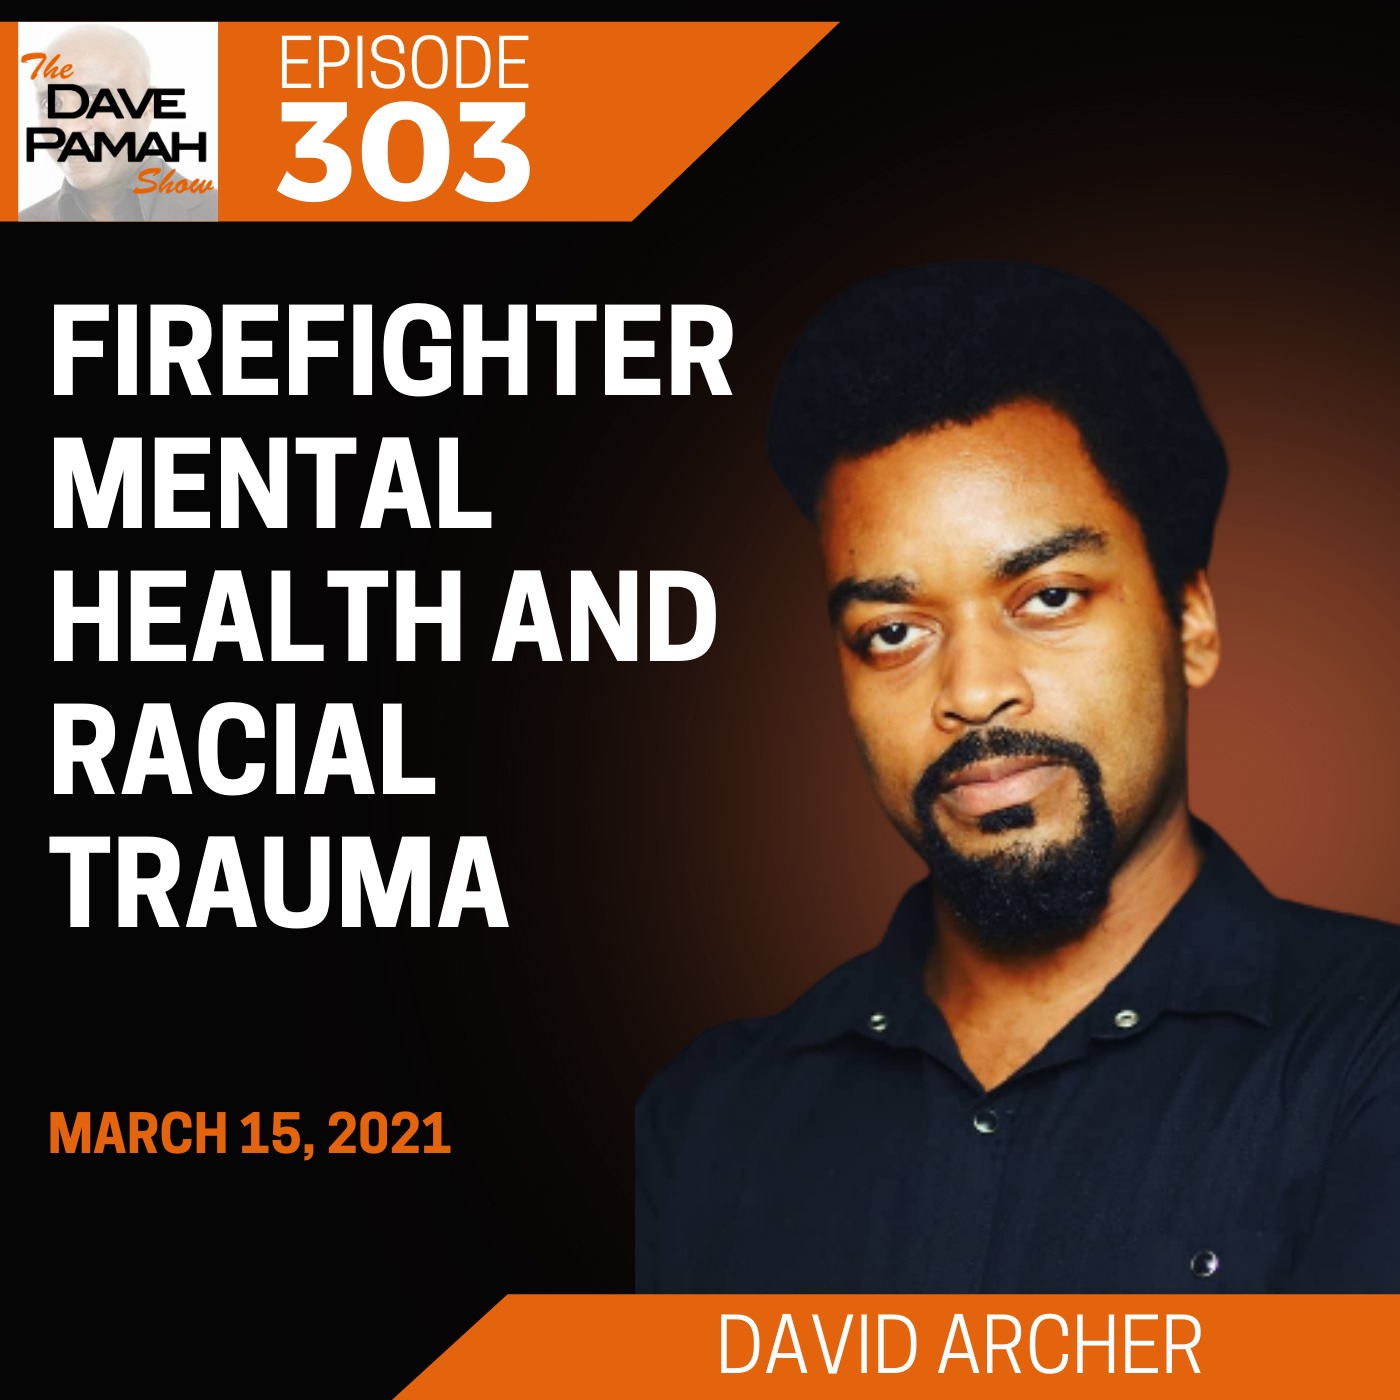 Firefighter mental health and racial trauma with David Archer Image